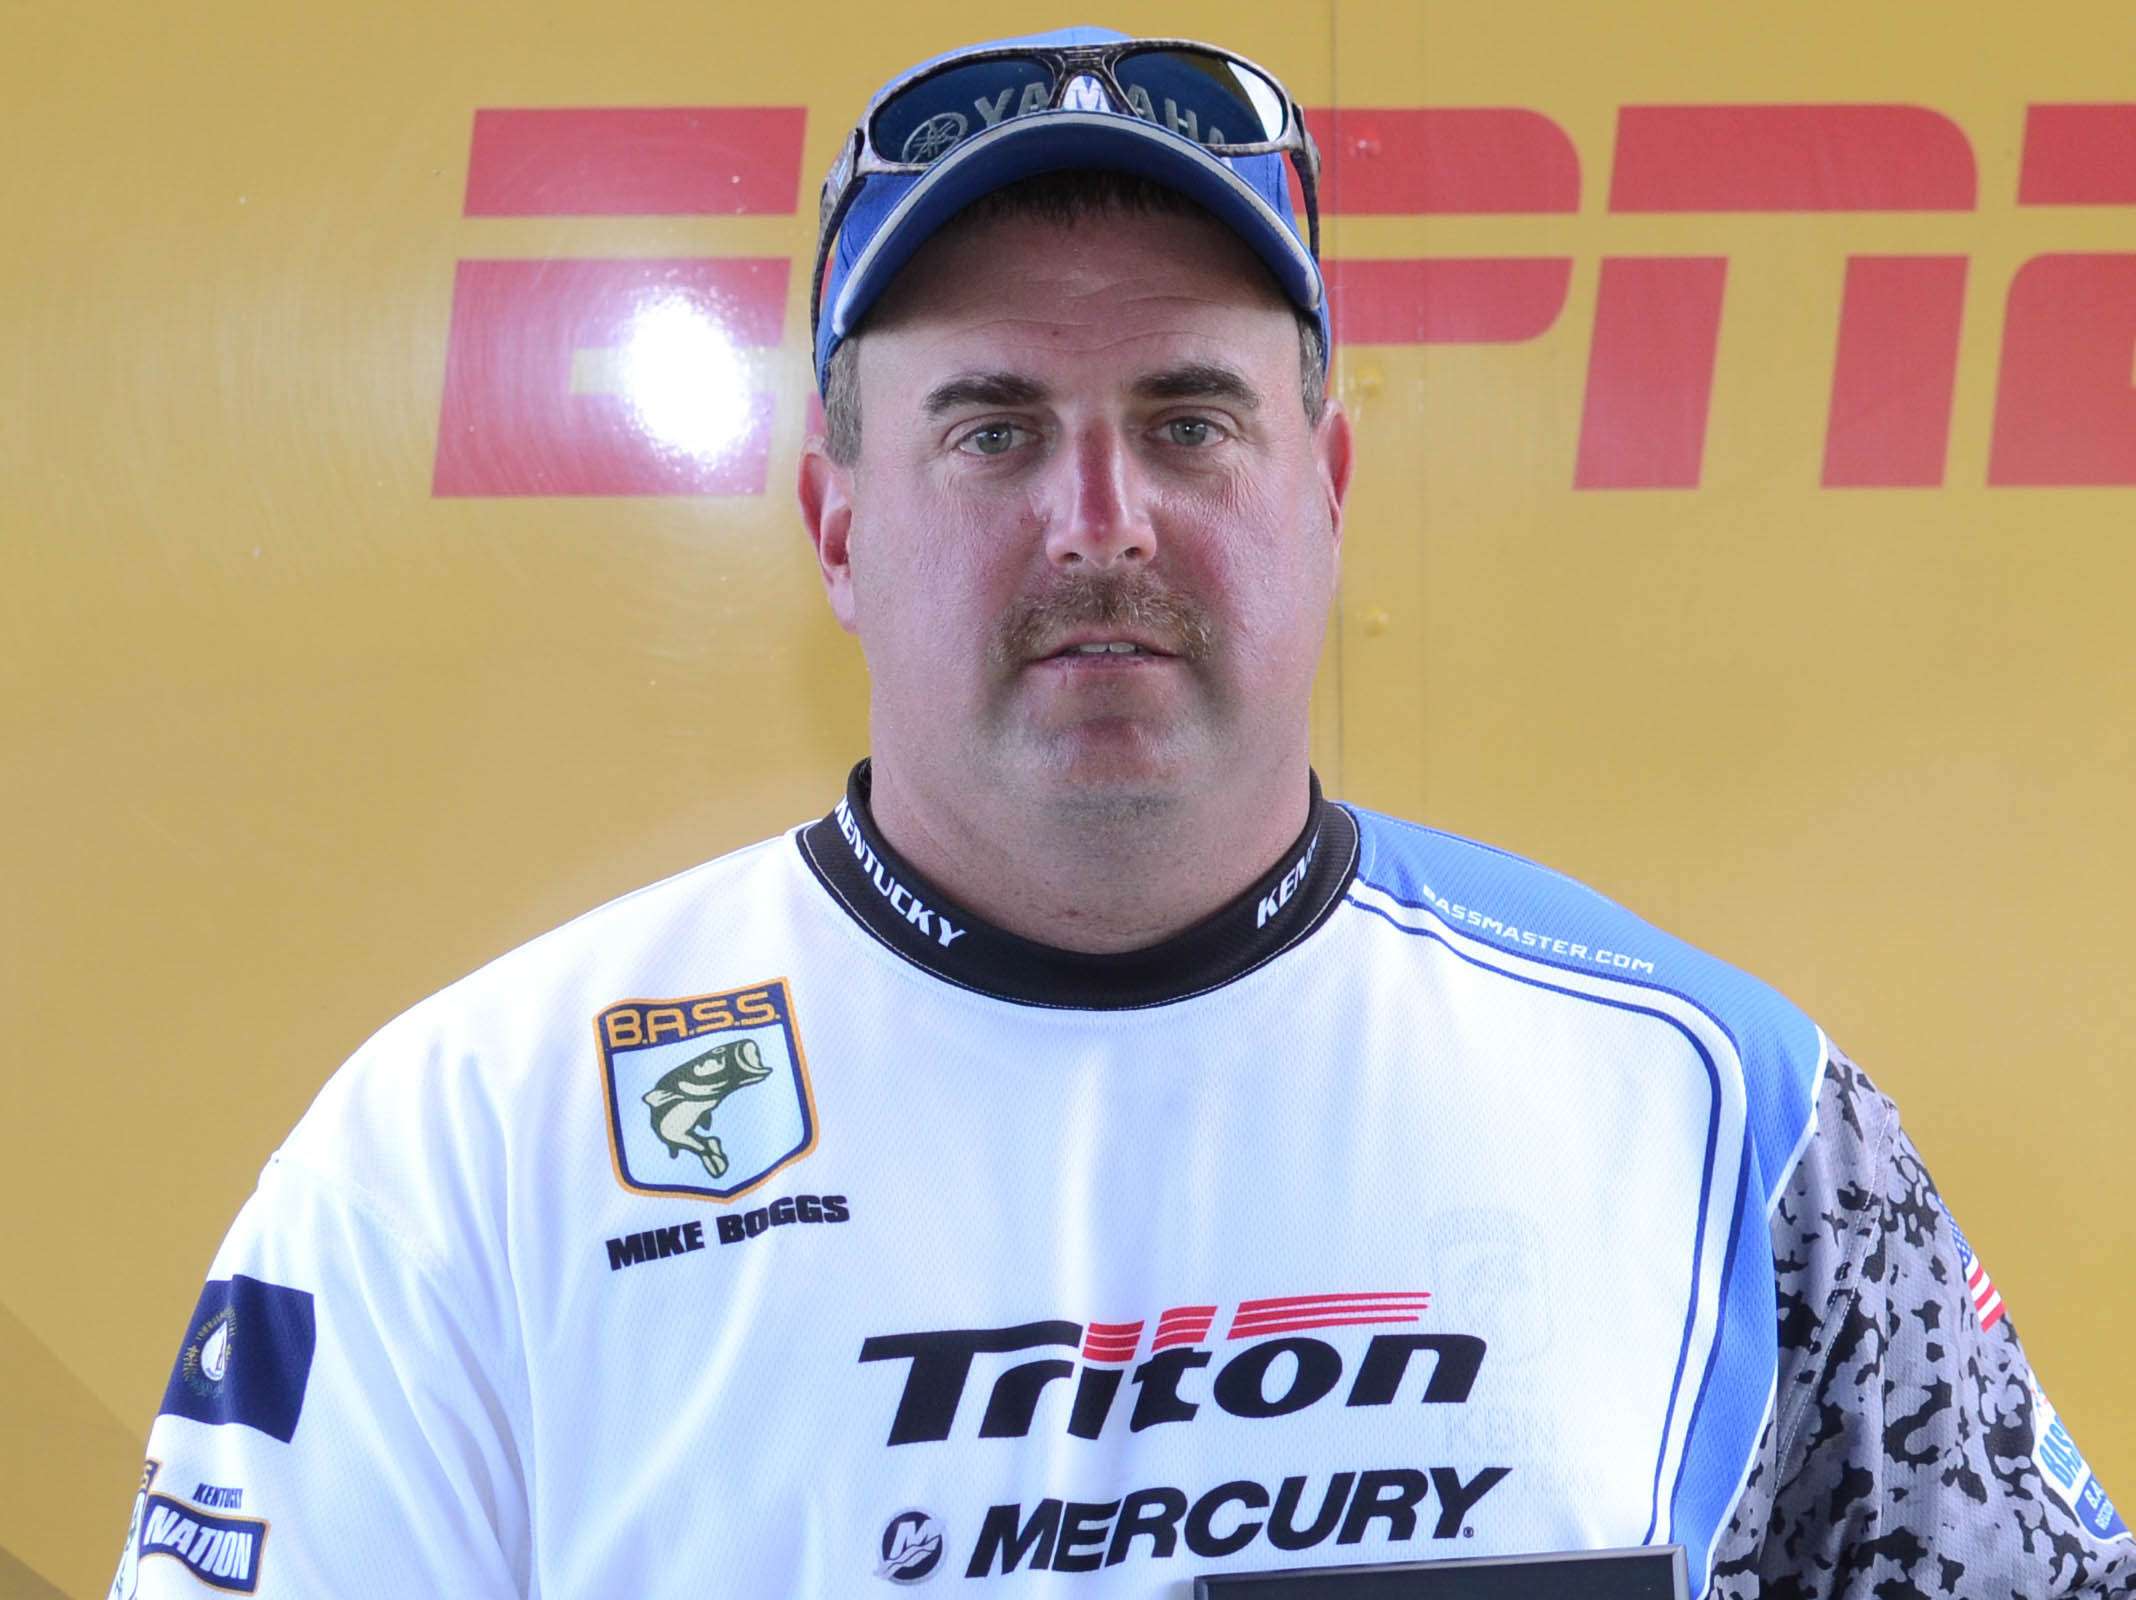 Michael Boggs <br>
Kentucky Boater <br>
Michael Boggs is from Portsmouth, Ohio, but heâs representing Kentucky in the championship. Boggs is less likely to succumb to pressure because heâs already been to the championship before, back in 2014. Heâs a member of the Louisa Bass Club, and he works as a maintenance coordinator for Marathon Petroleum. He likes bowhunting for whitetail. Boggsâ sponsors are Power Team Lures, Border Sporting Goods and The Tacklebox. 